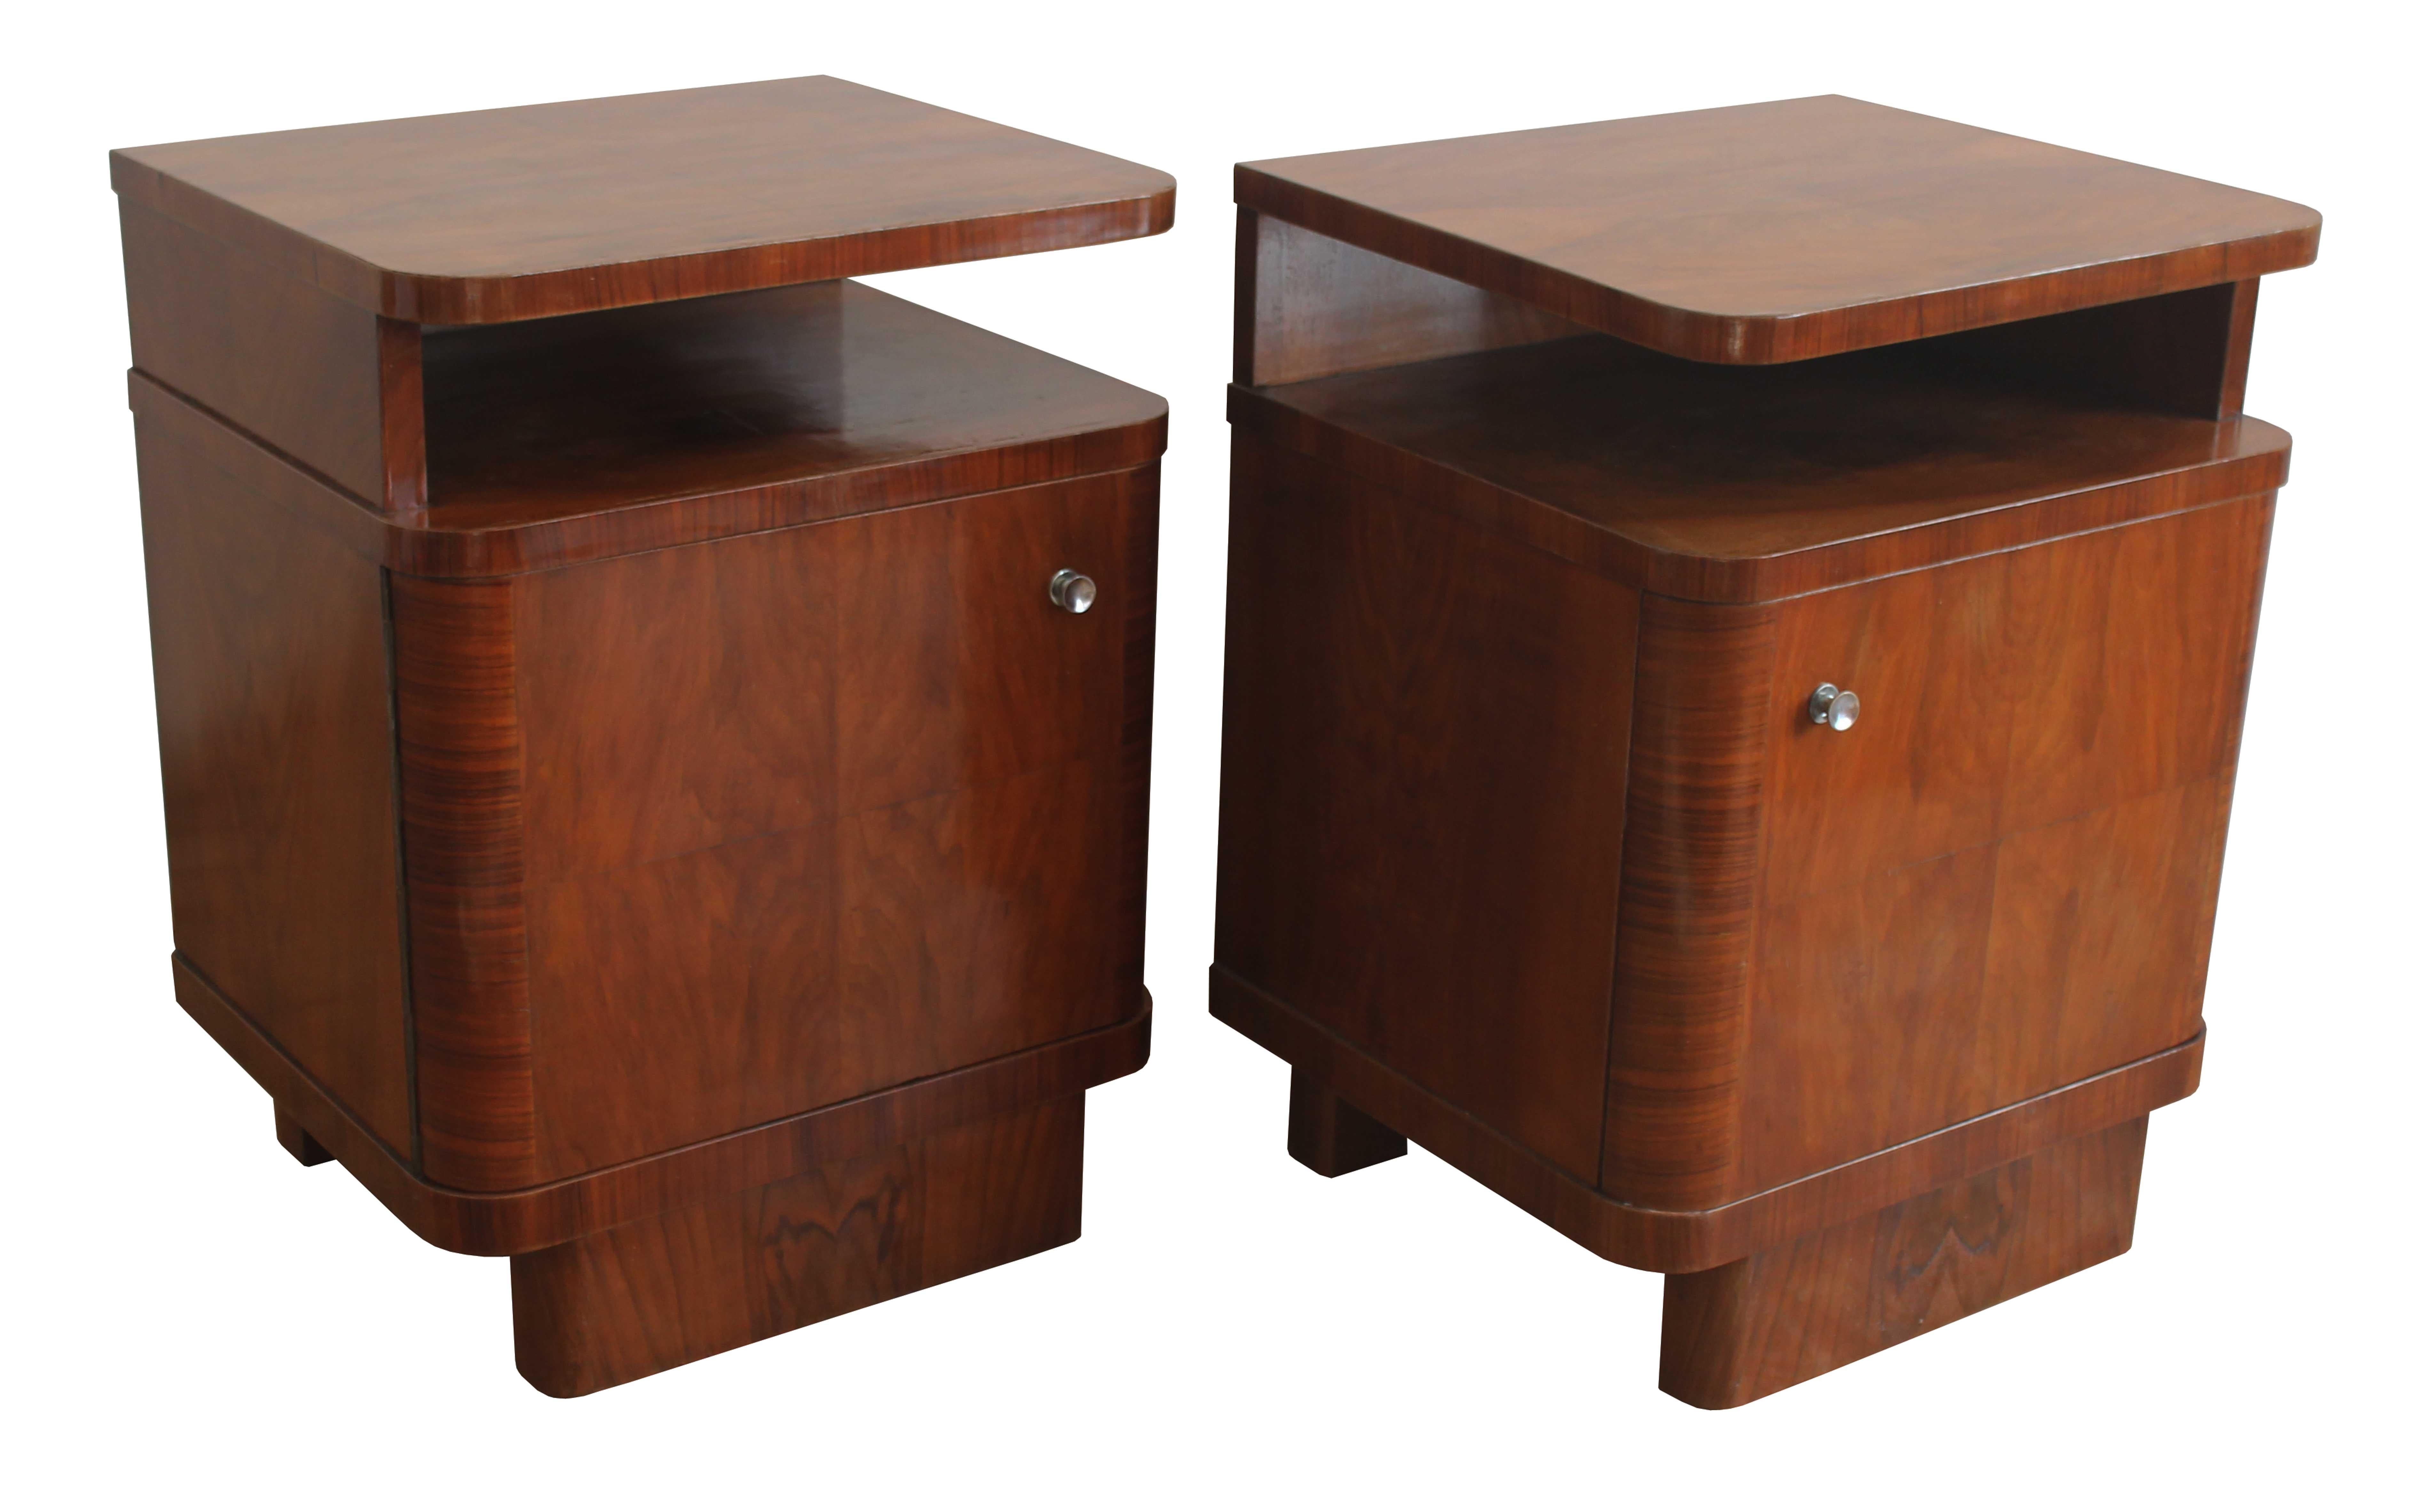 A pair of 1930’s Bedside tables made of Beech with a rich Walnut veneer texture.

There were many variations of this popular piece of furniture; it was an essential item for every stylish bedroom of the time.

This pair has got a wonderful